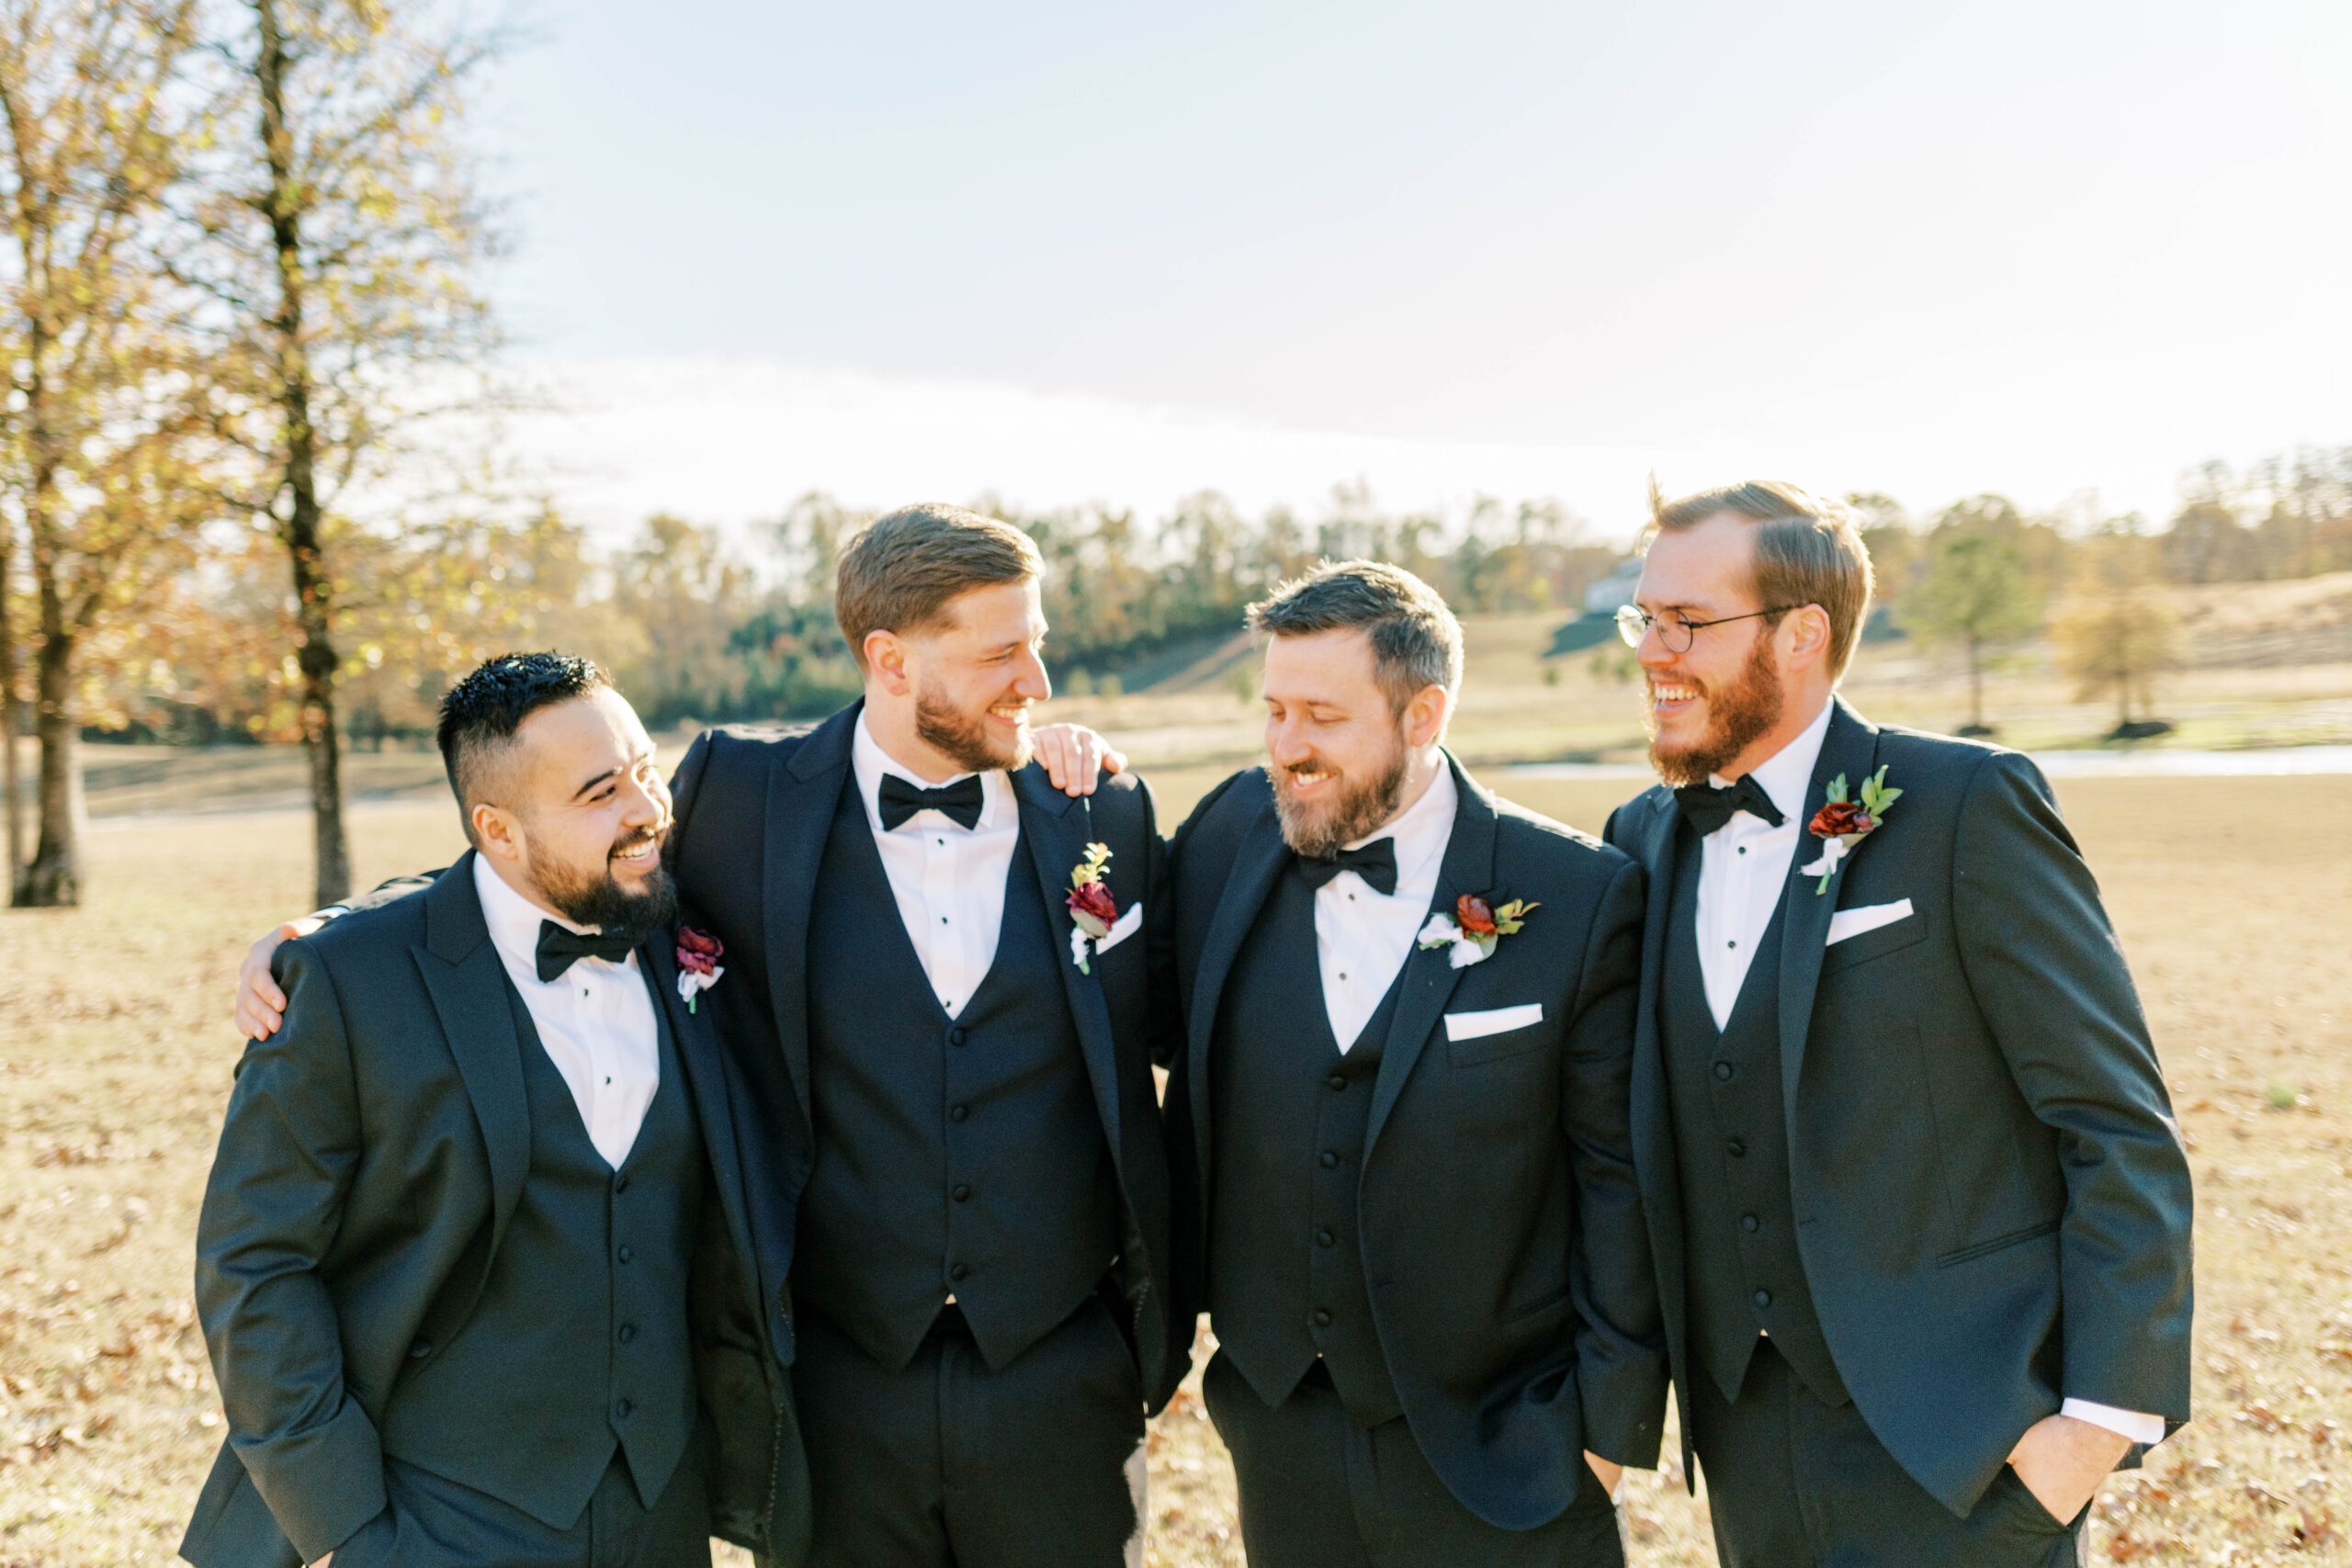 How to be the Best Groomsman